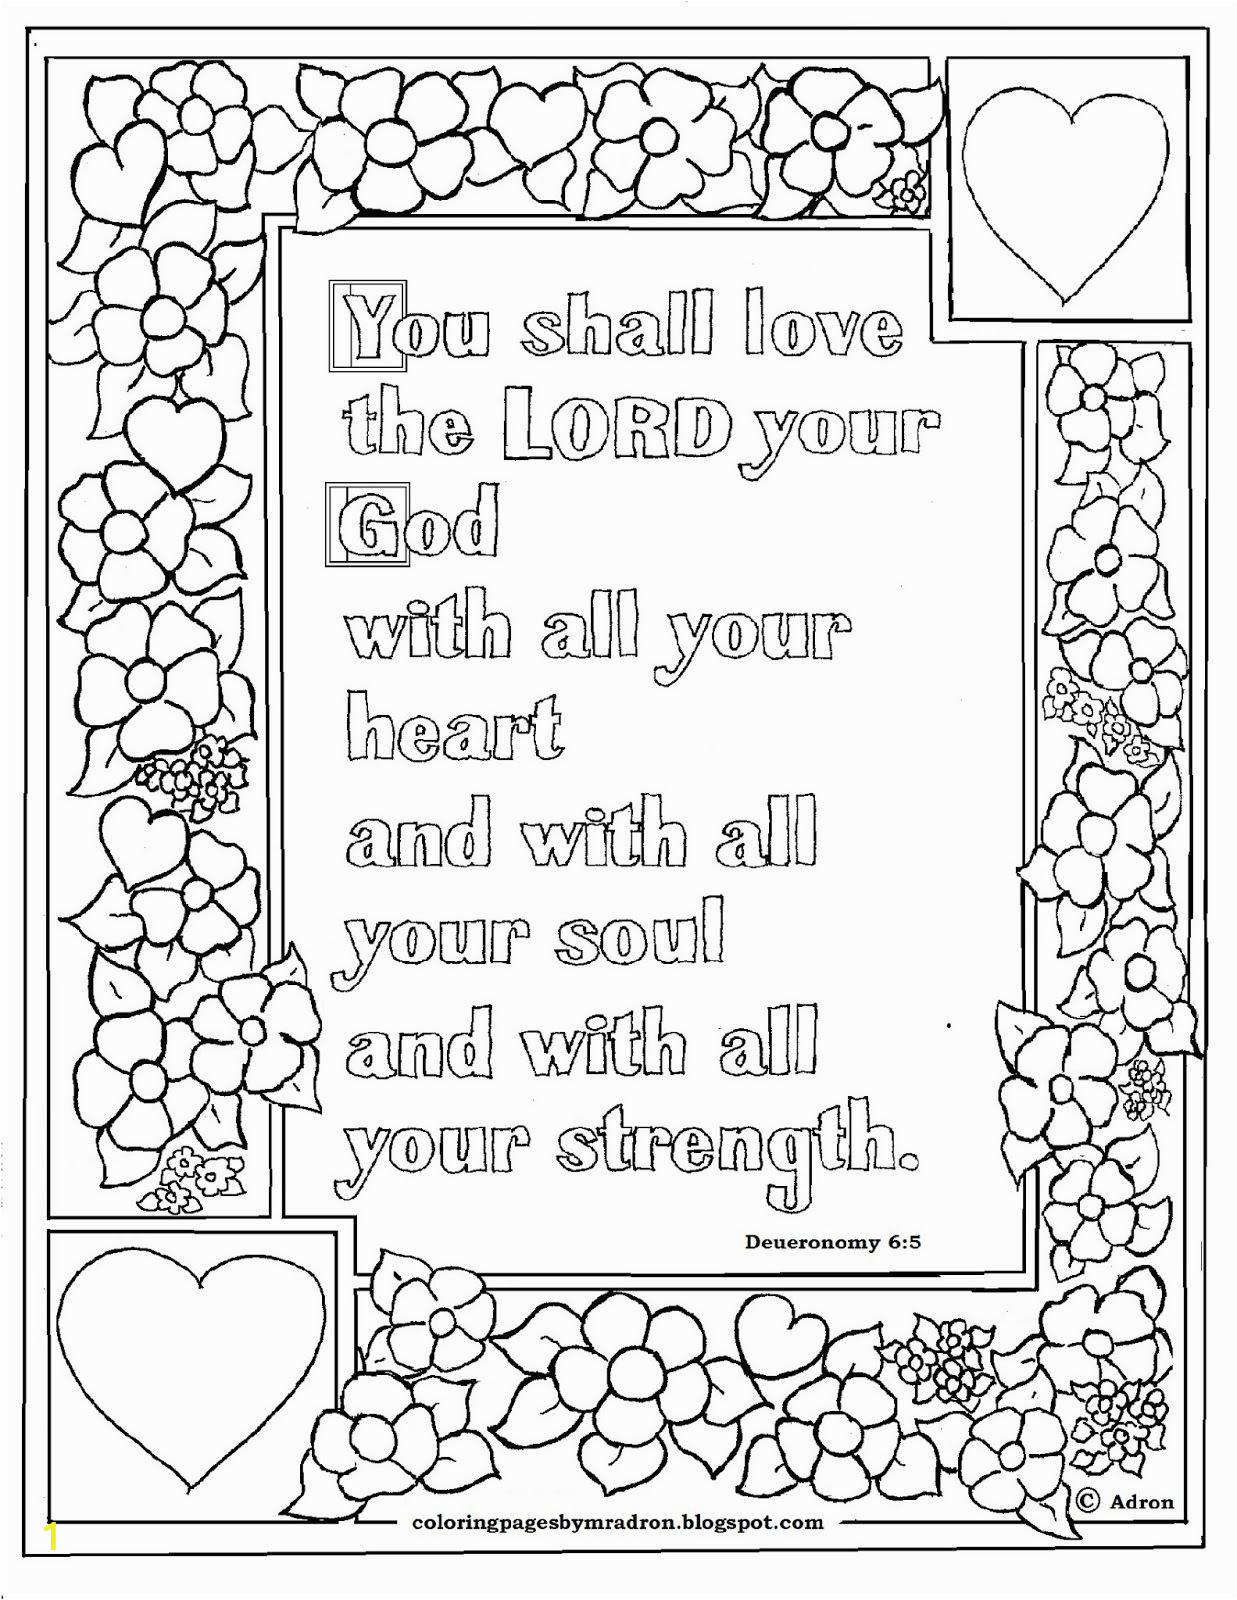 Free Thank You for Your Service Coloring Pages Deuteronomy 6 5 Bible Verse to Print and Color This is A